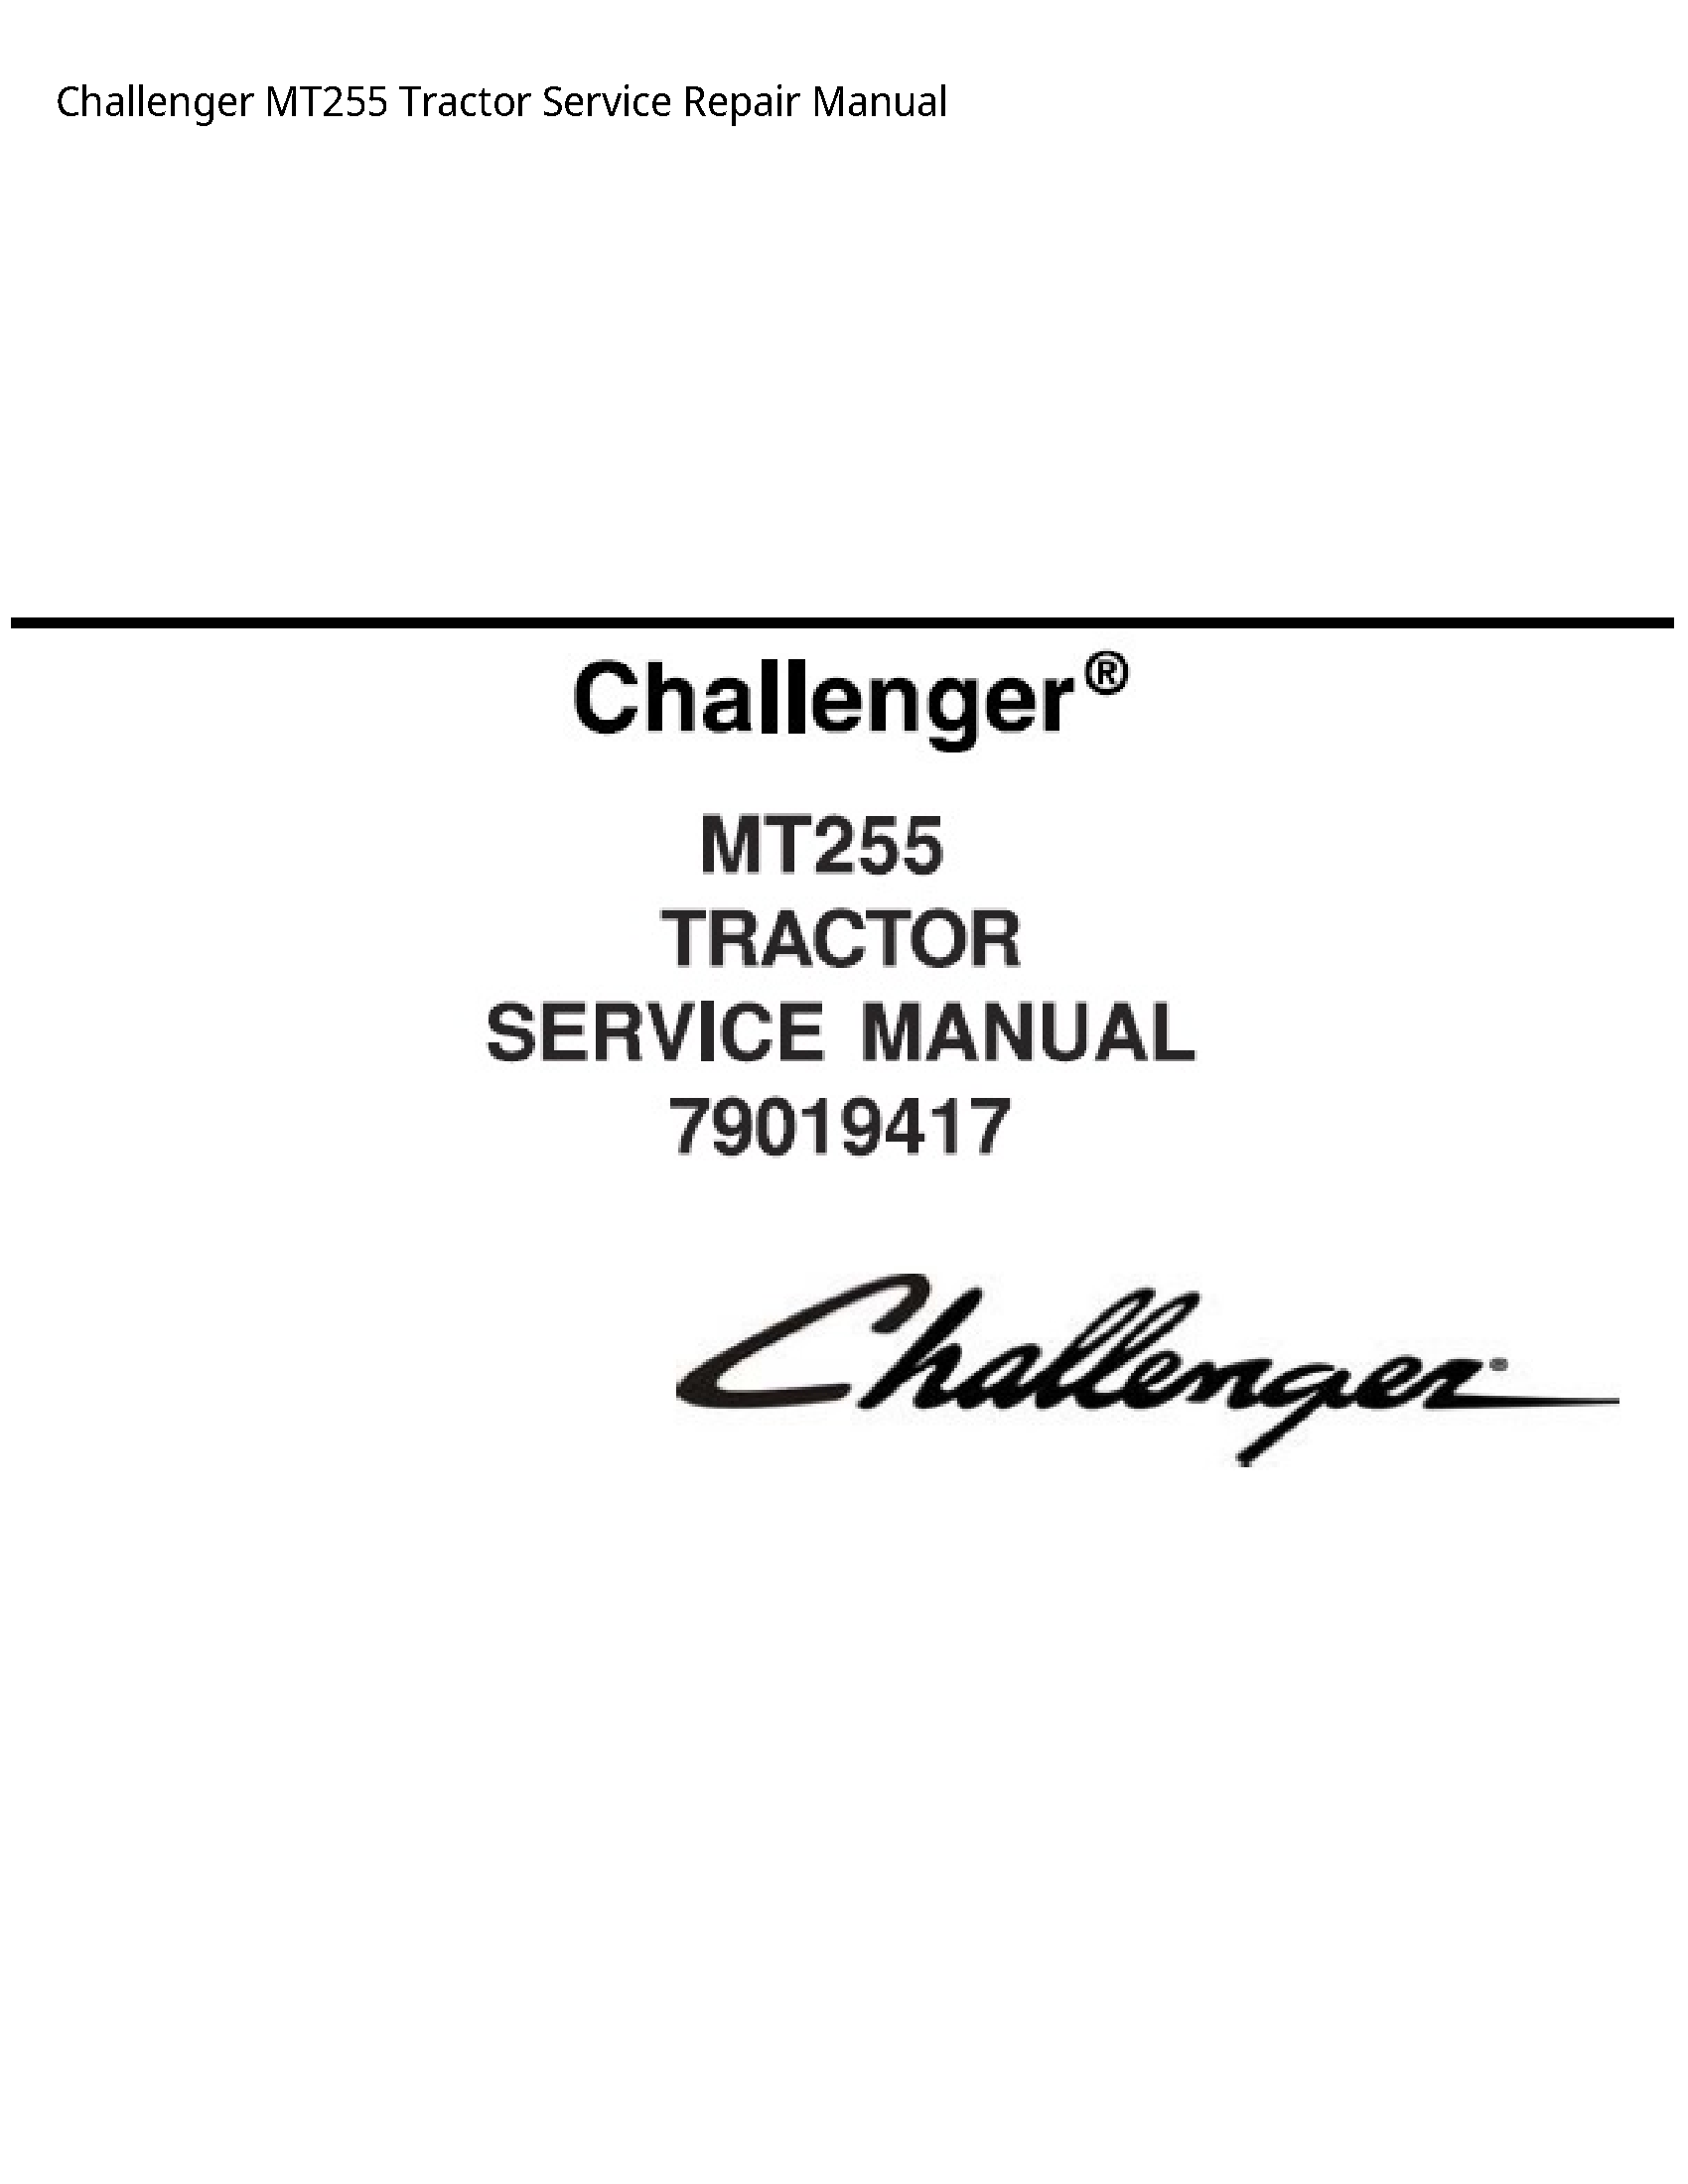 Challenger MT255 Tractor manual